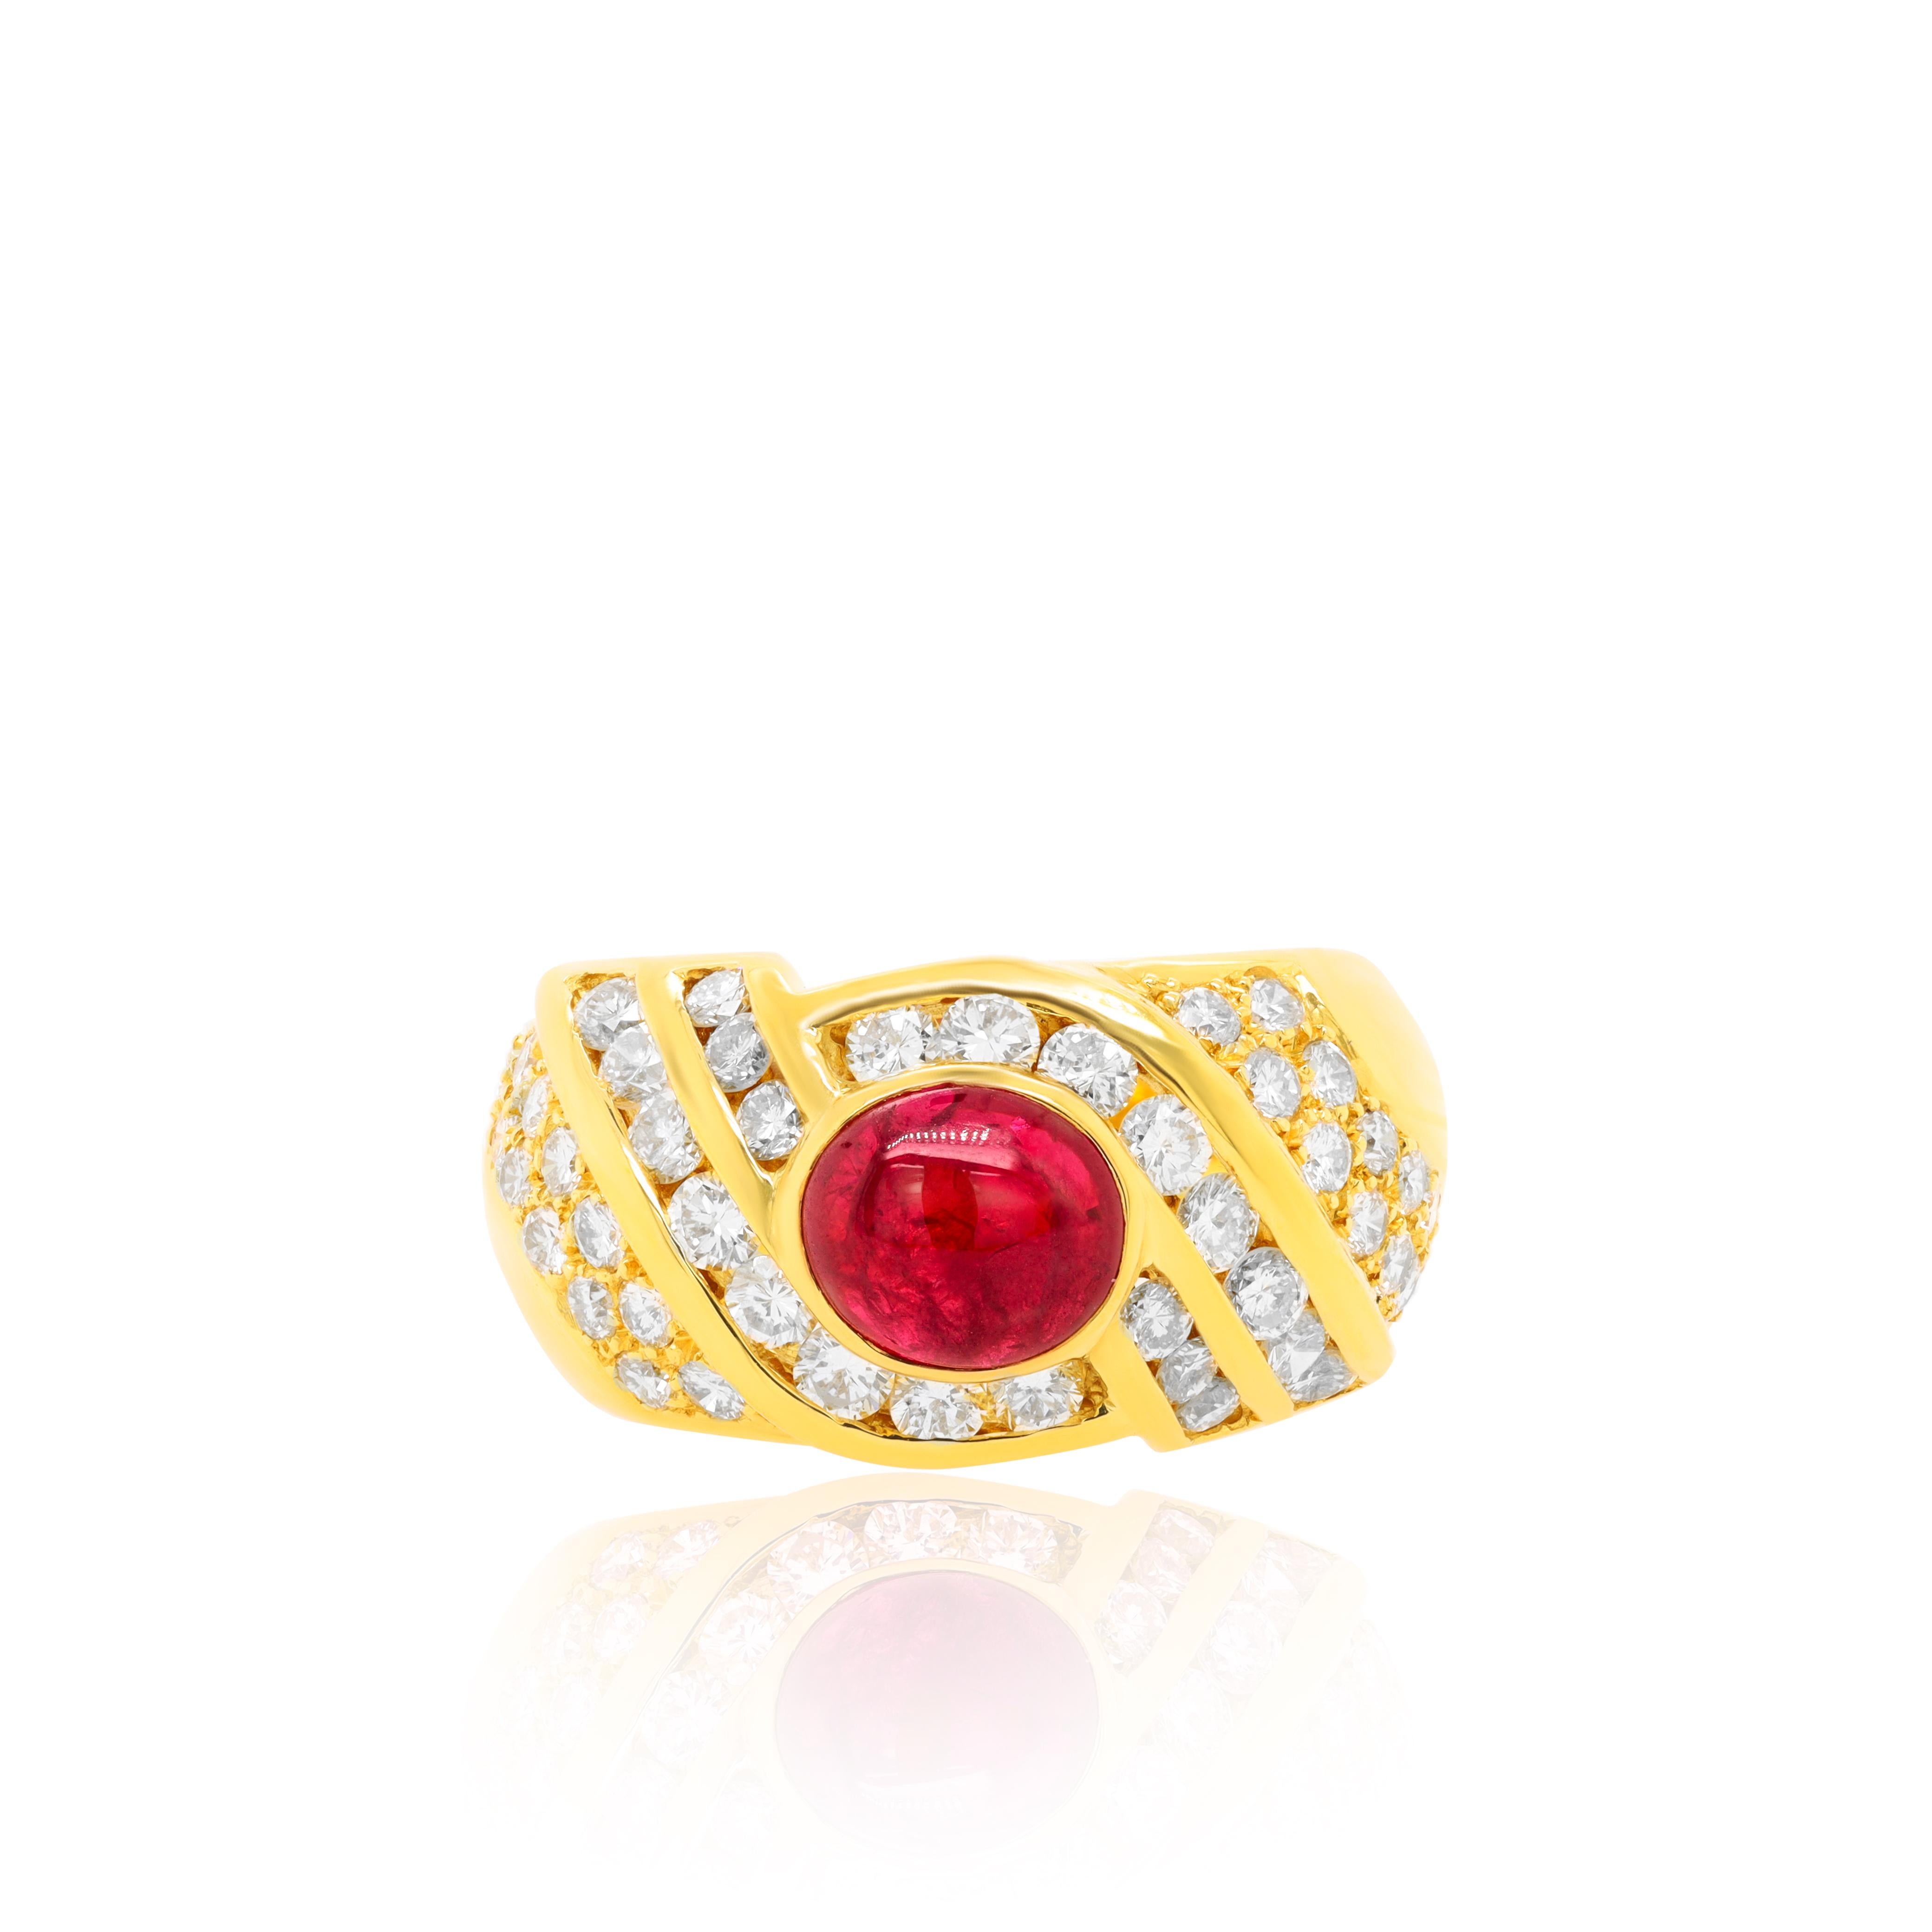 18 kt yellow gold ruby and diamond fashion ring featuring a center 1.50 ct ruby surrounded by 1.50 cts tw of diamonds.
Diana M. is a leading supplier of top-quality fine jewelry for over 35 years.
Diana M is one-stop shop for all your jewelry